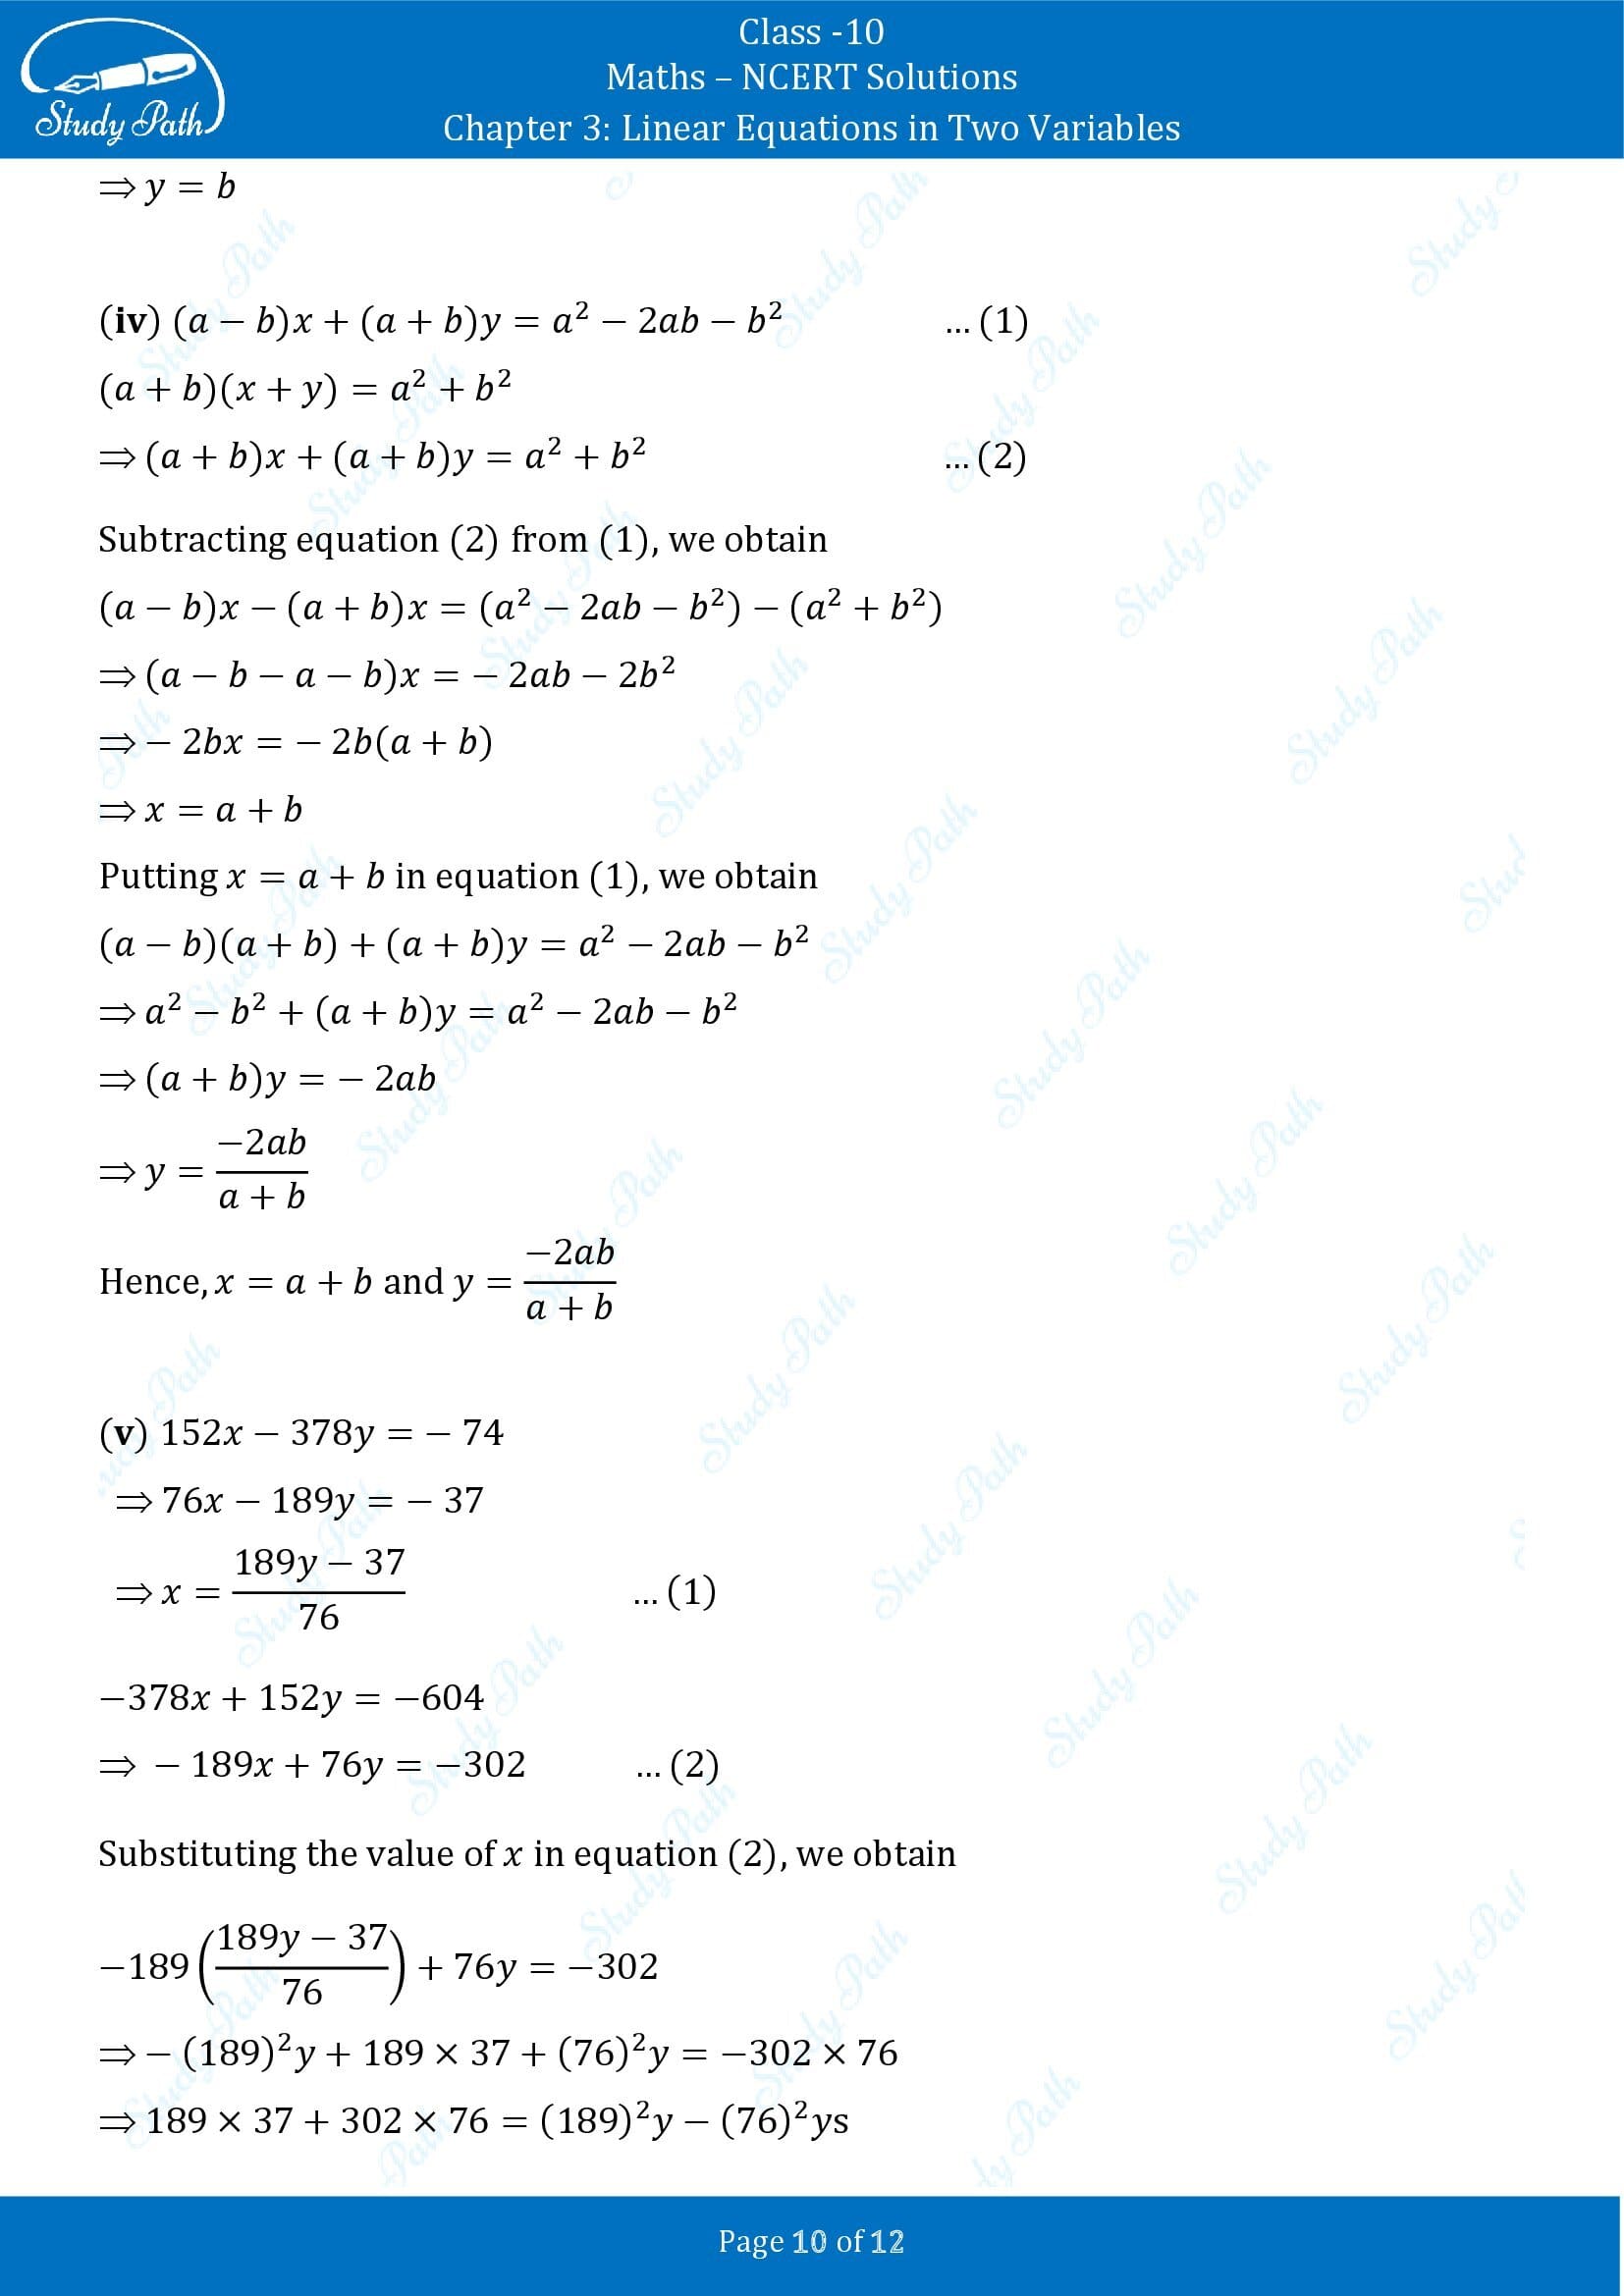 NCERT Solutions for Class 10 Maths Chapter 3 Linear Equations in Two Variables Exercise 3.7 00010